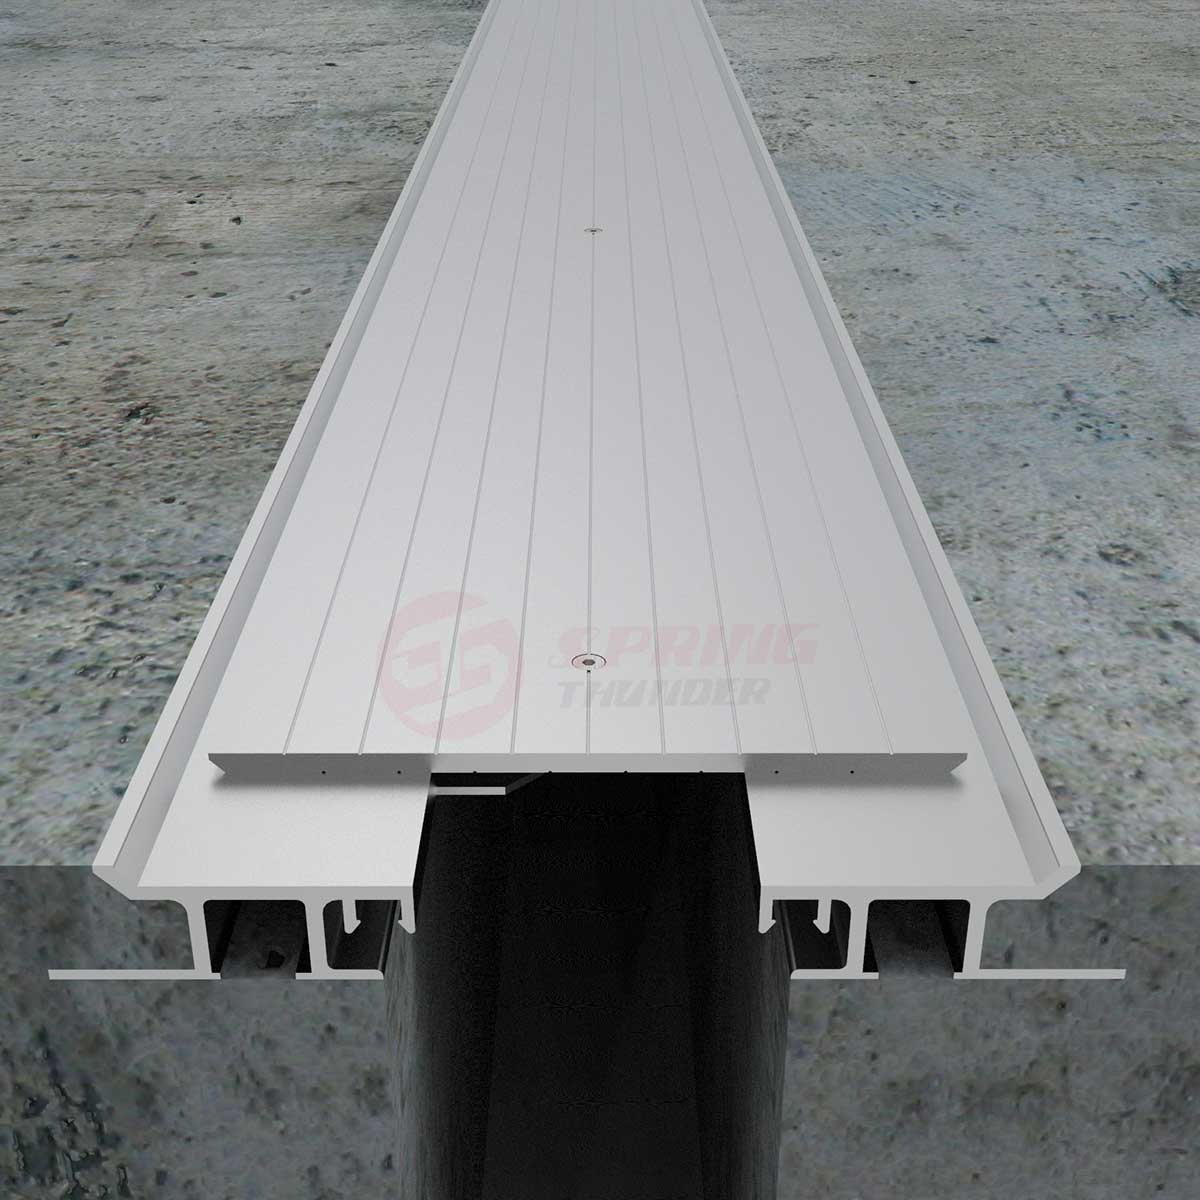 Heavy Duty Parking Garage Expansion Joint Cover 1